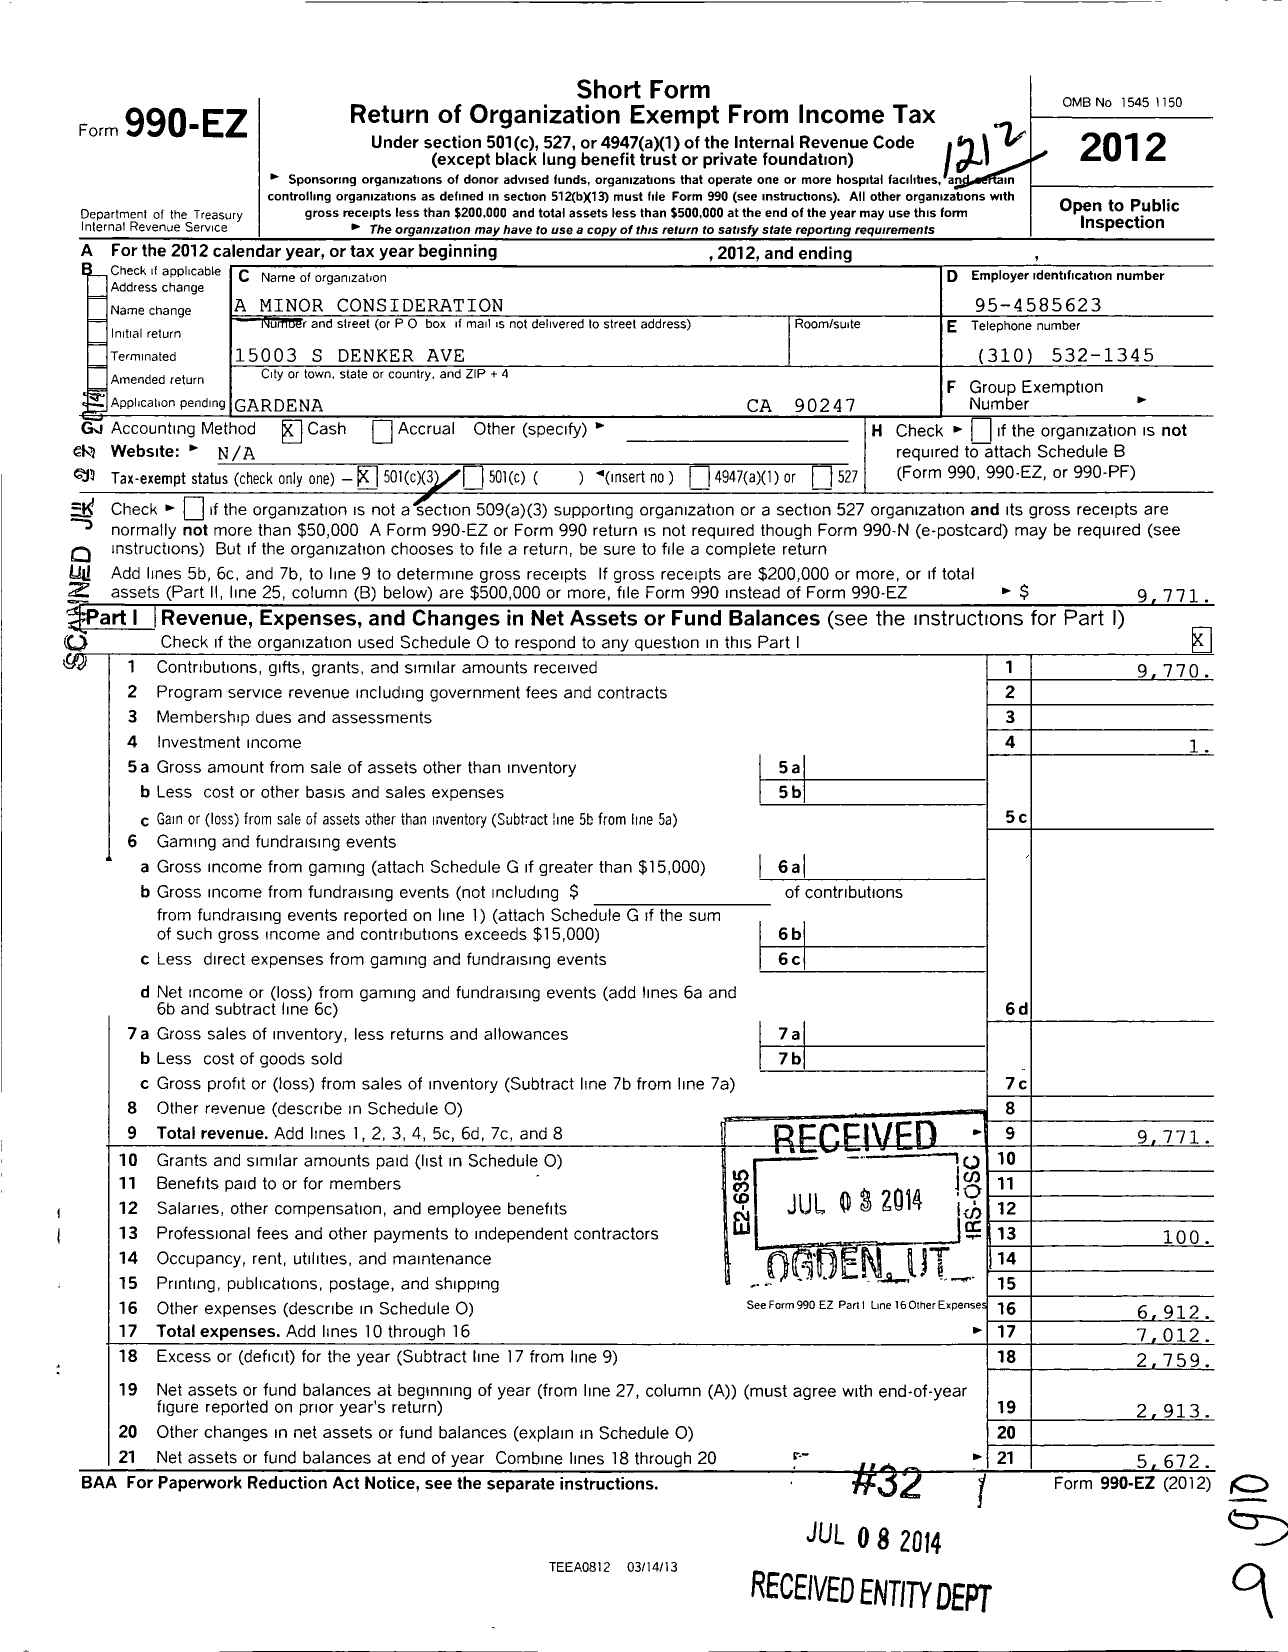 Image of first page of 2012 Form 990EZ for A Minor Consideration